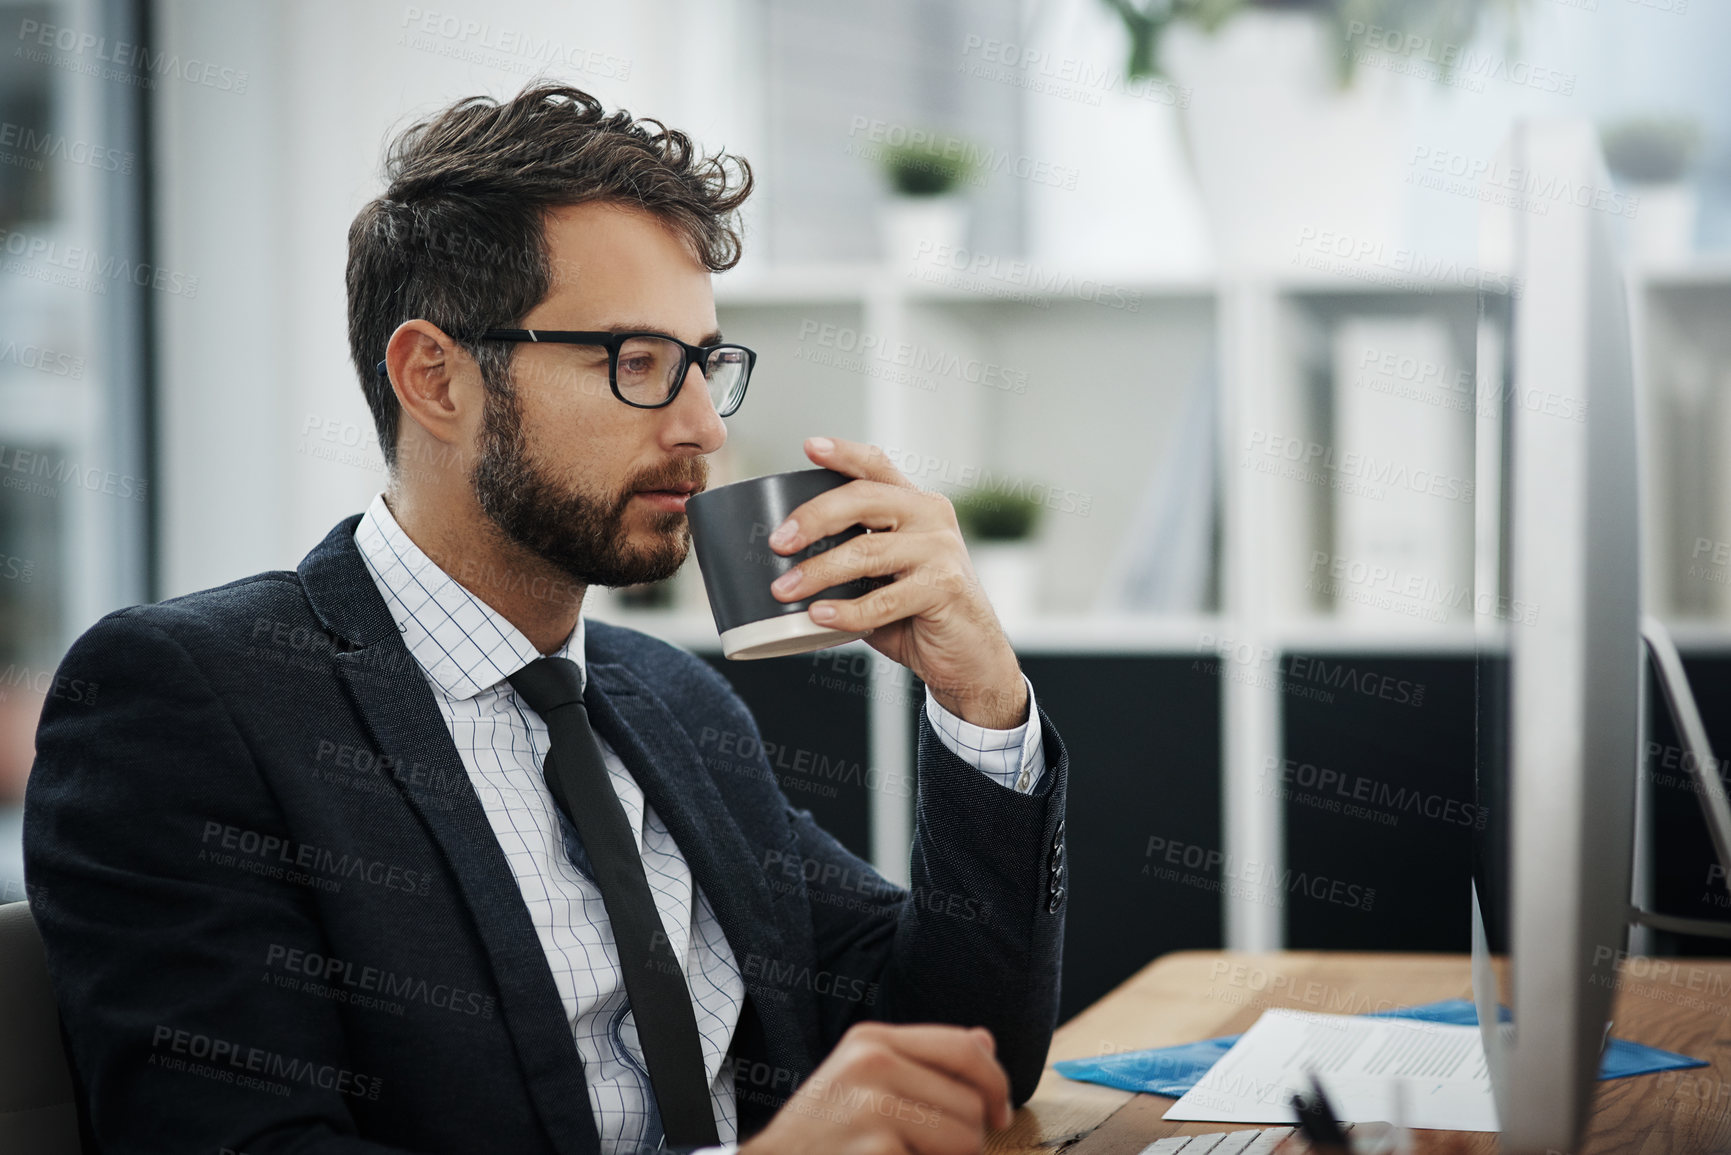 Buy stock photo Shot of a young businessman drinking coffee while working in an office